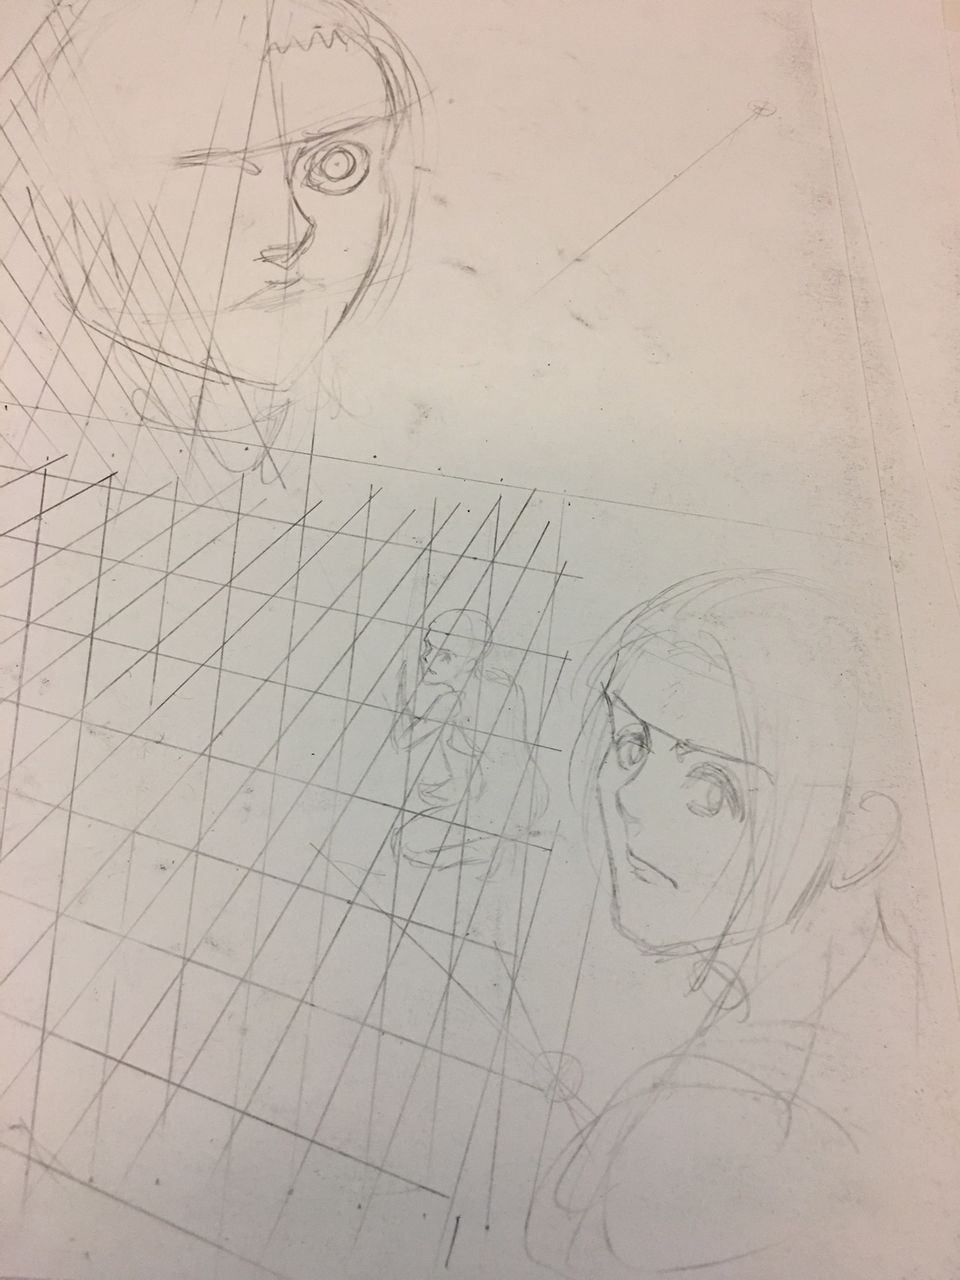 snknews: Isayama Hajime Shares New Chapter 102 Sketches &amp; Announces Autograph